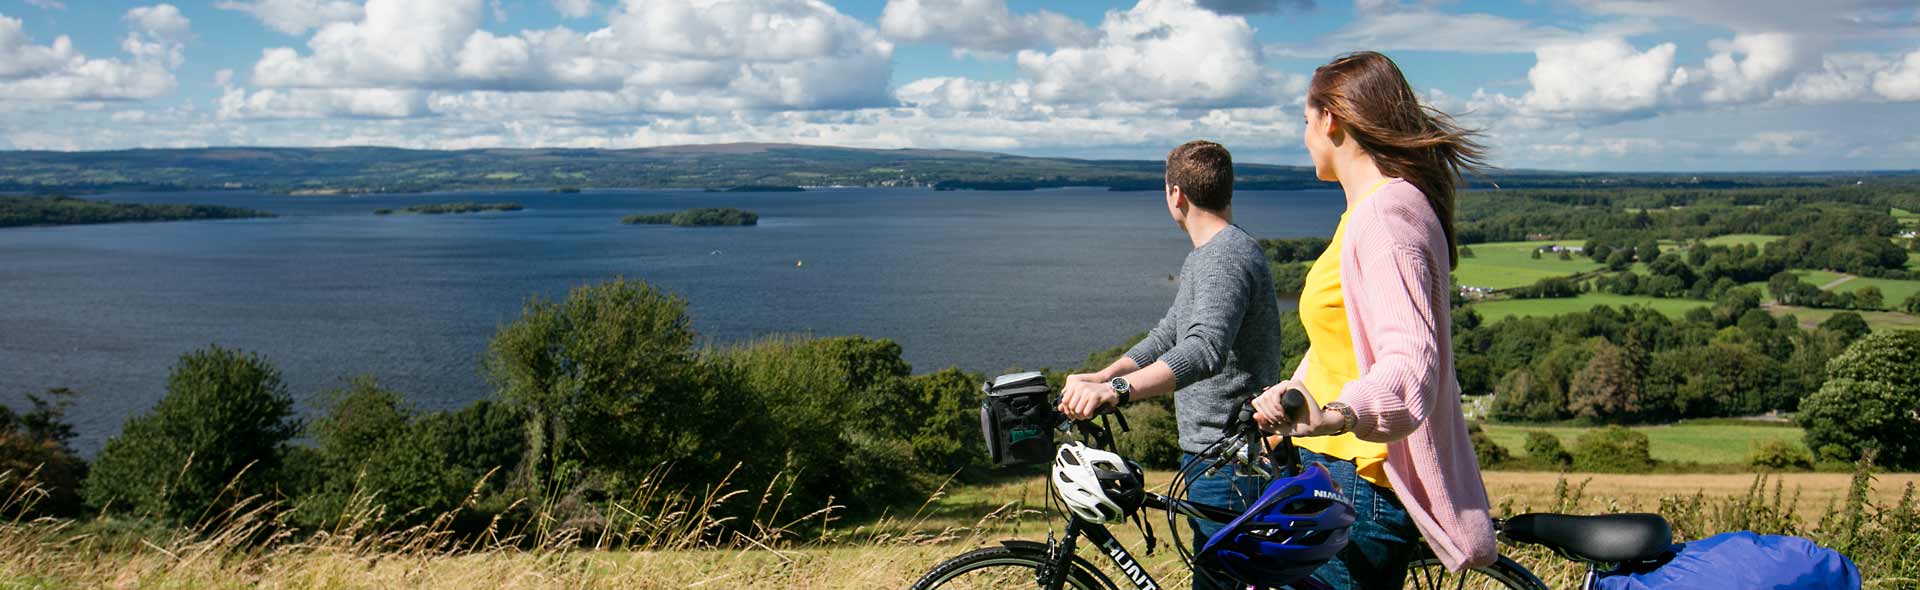 cyclists look out over Lough Derg